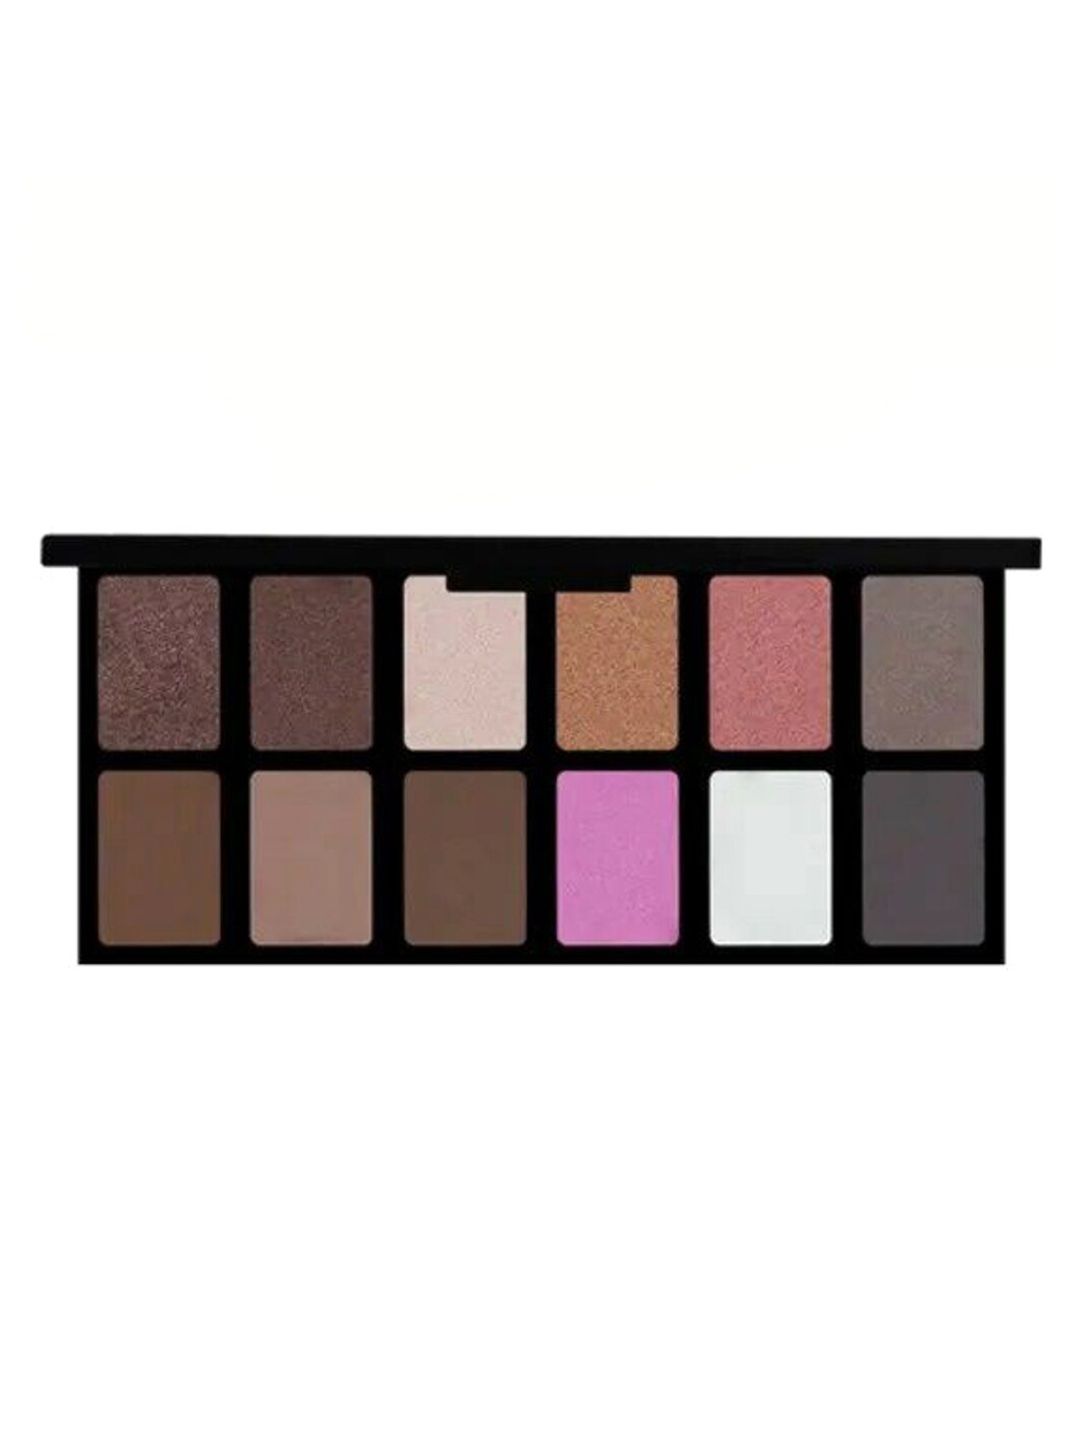 Sivanna Colors Double Exposure Eyeshadow Palette - HF350 03 Price in India